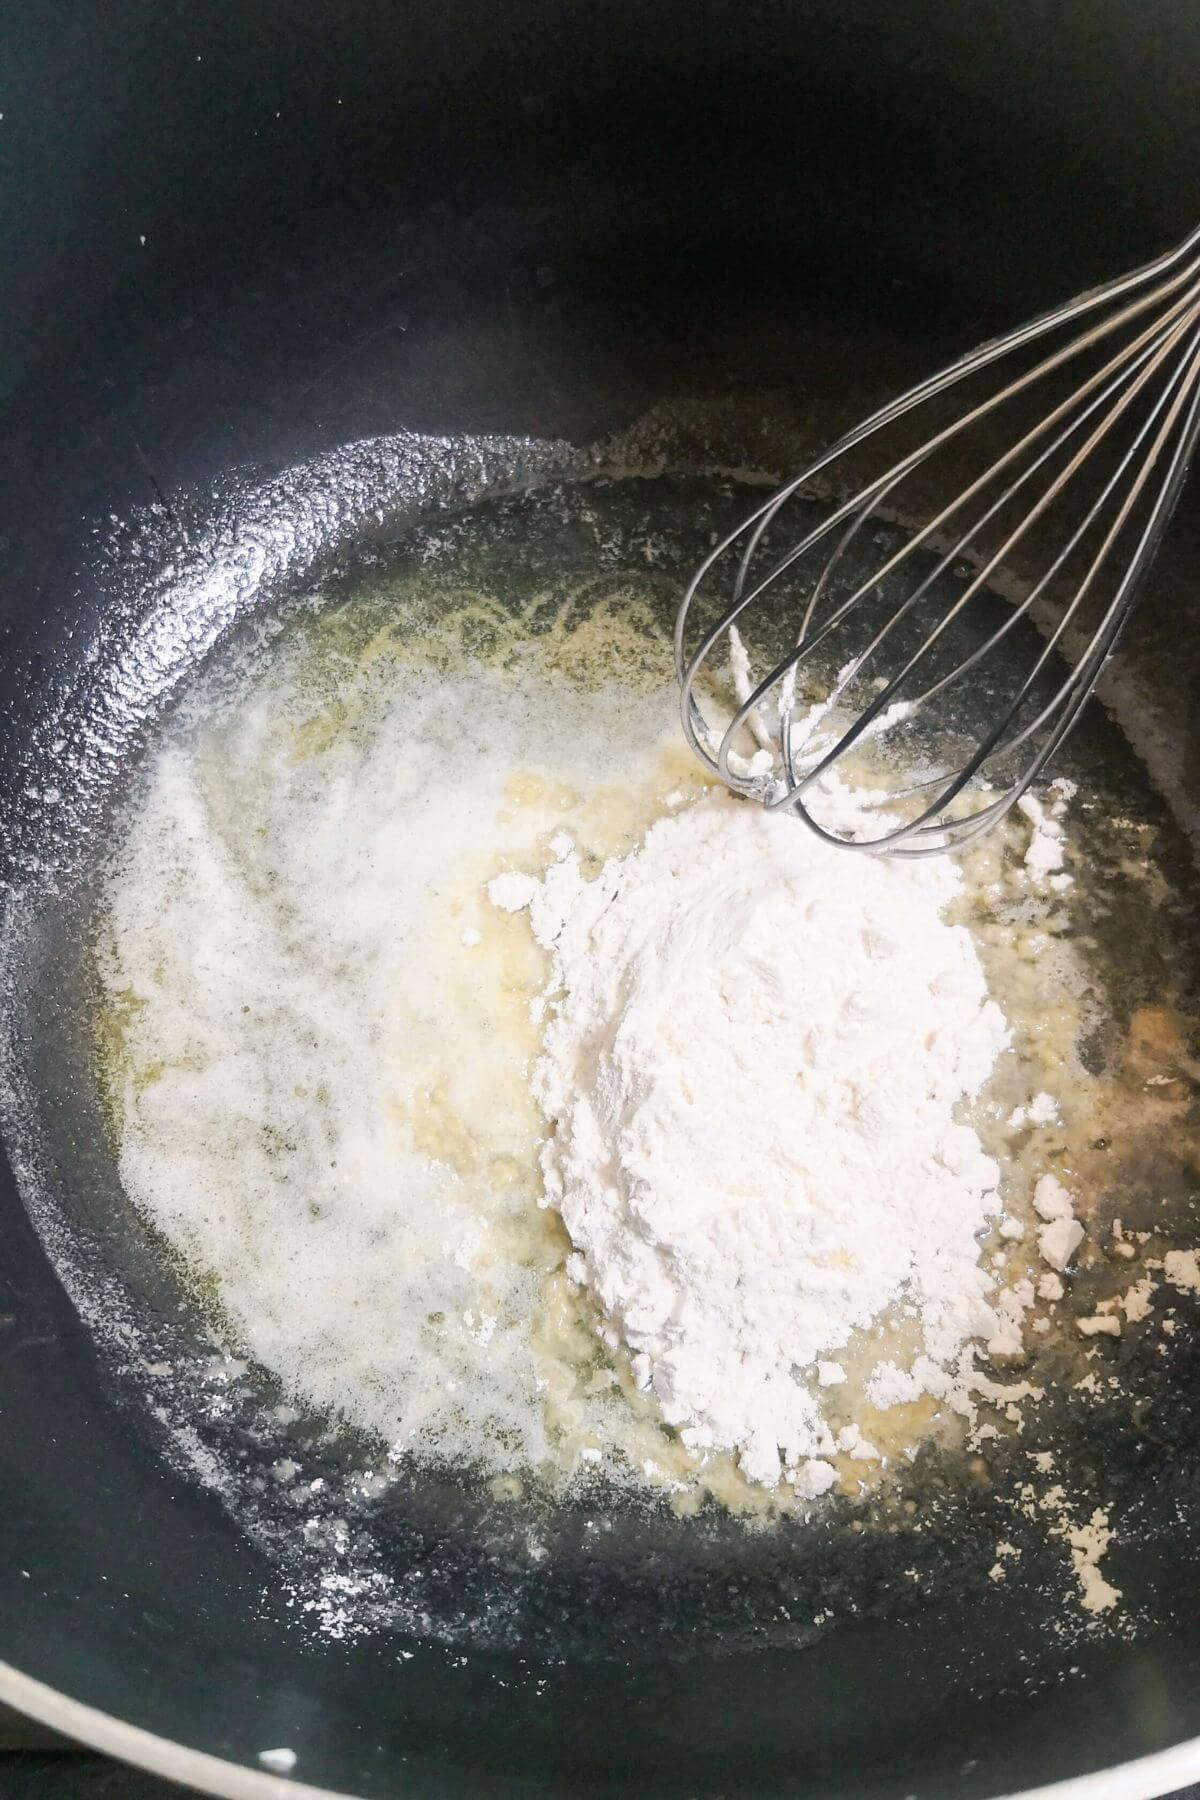 Flour added to melted butter in a large black pot.